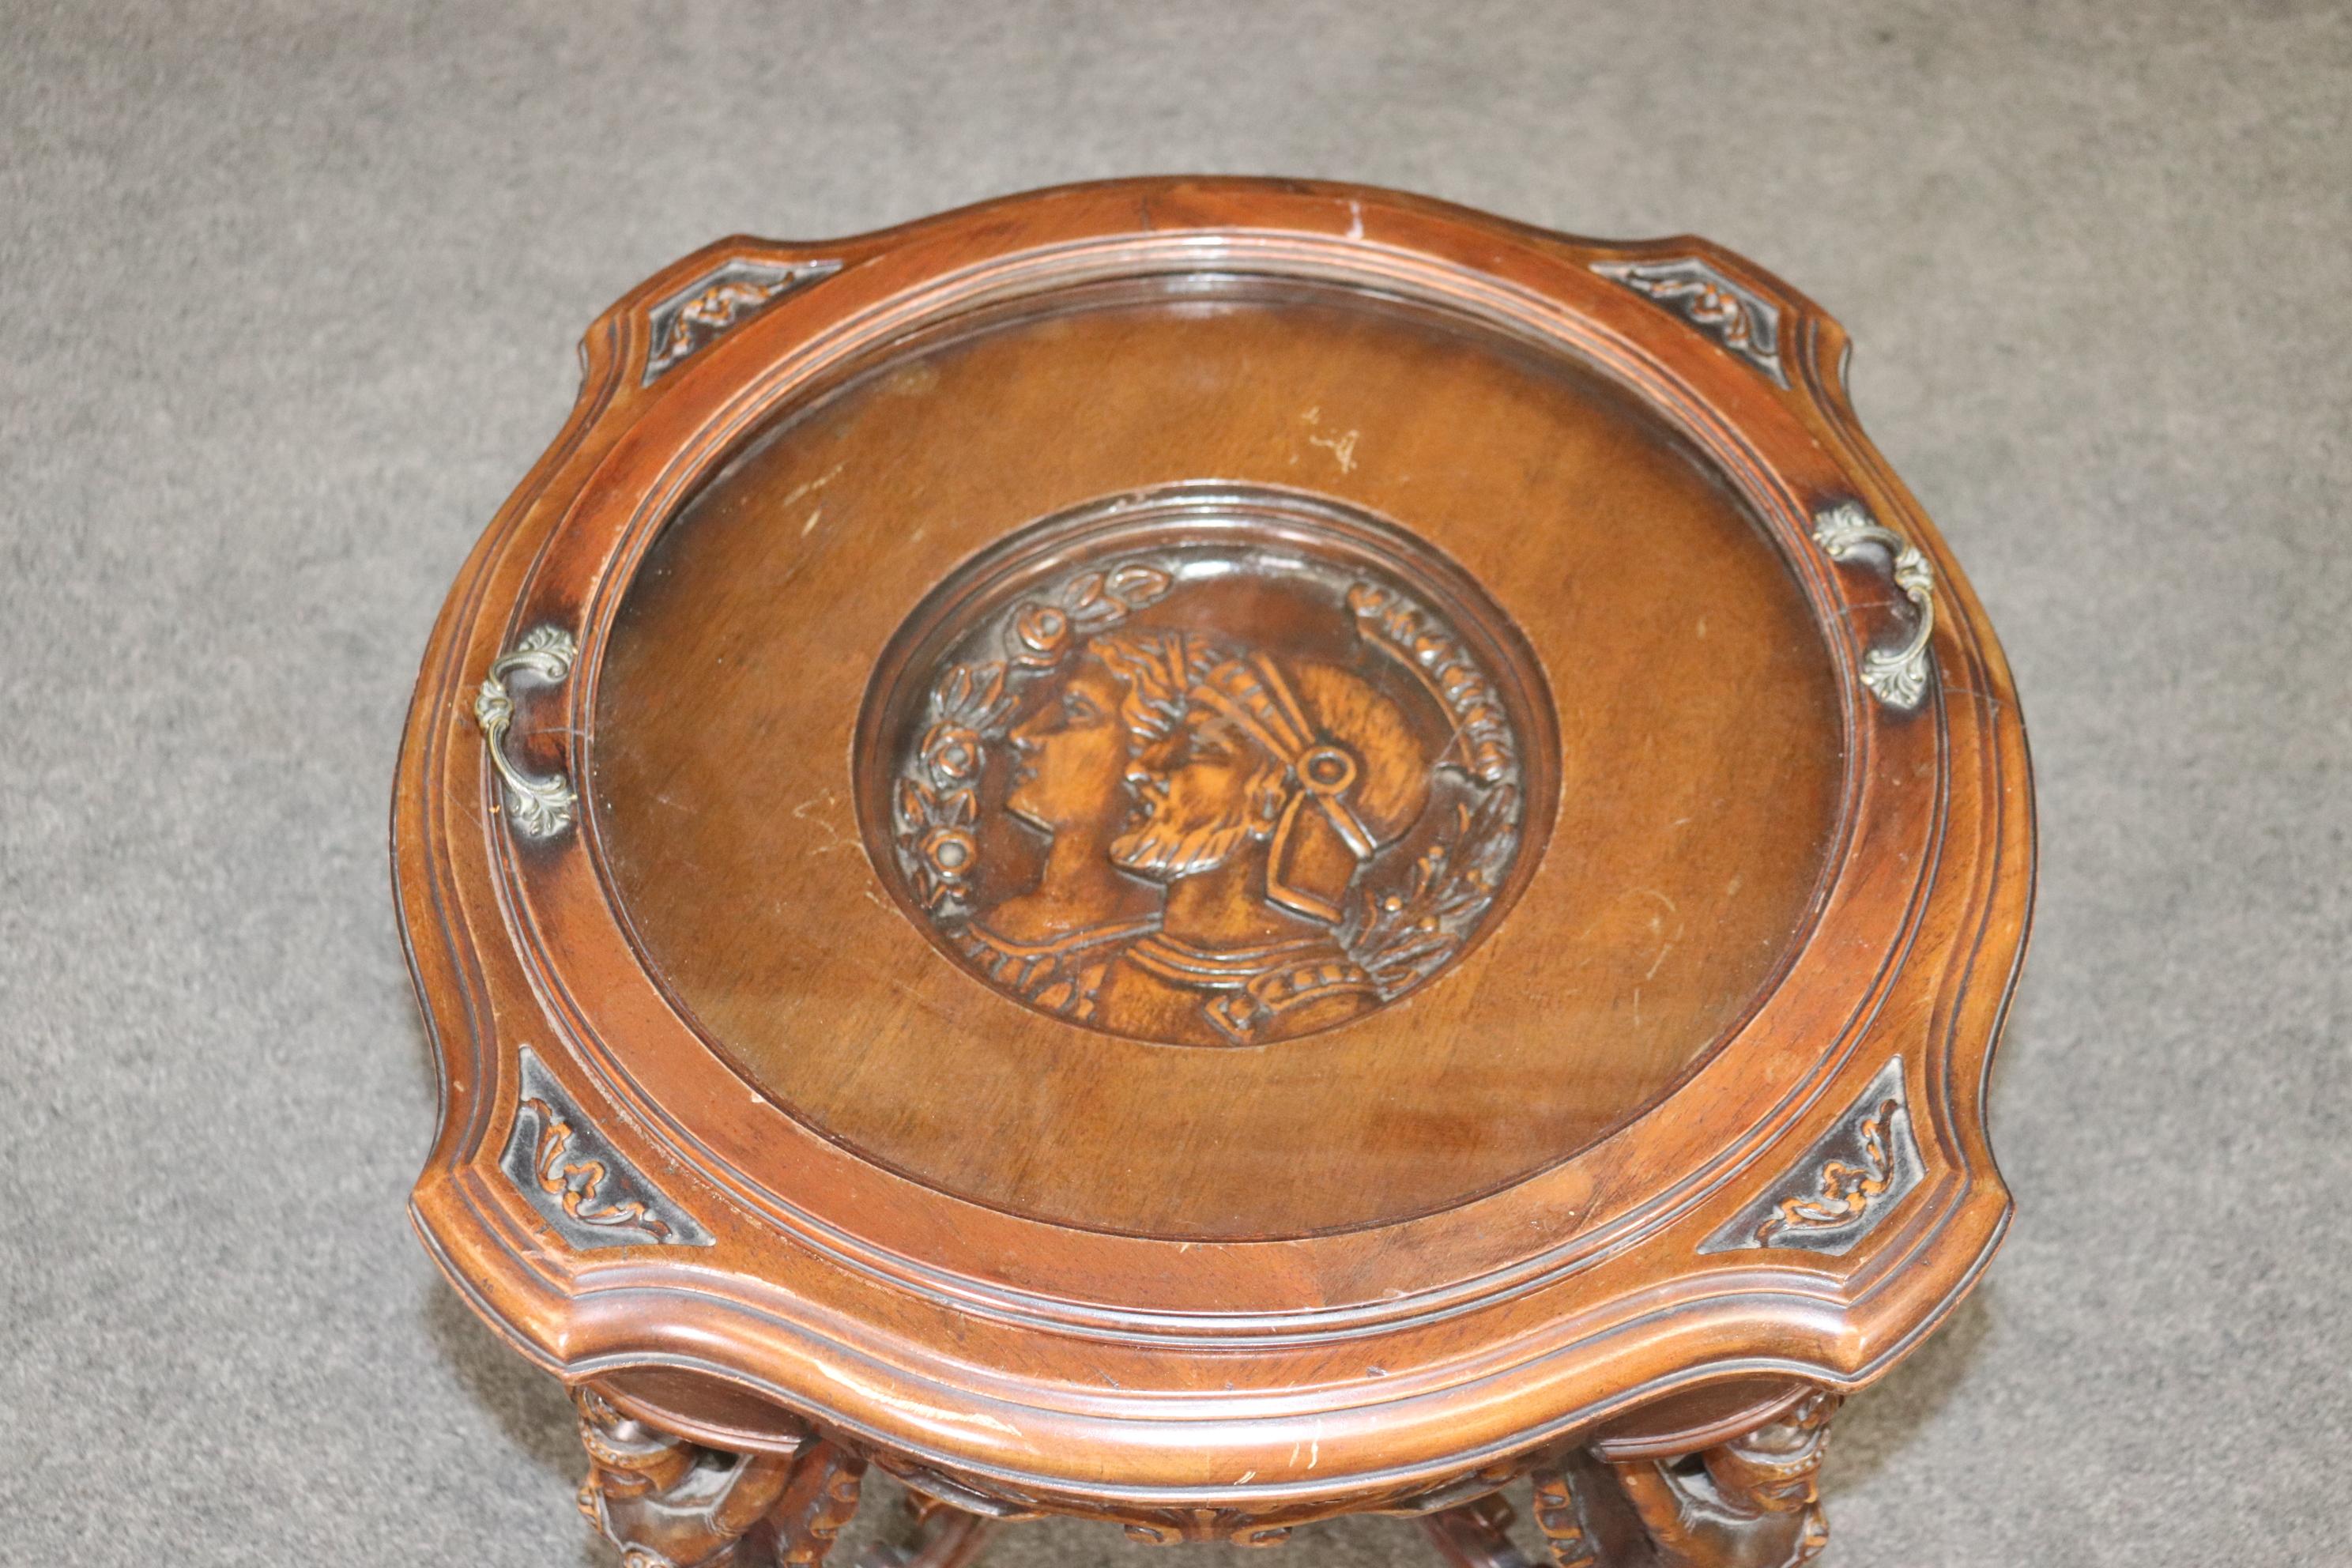 Neoclassical Revival Figural Carved Walnut Glass Tray Top Coffee Table with Roman Figures Circa 1930